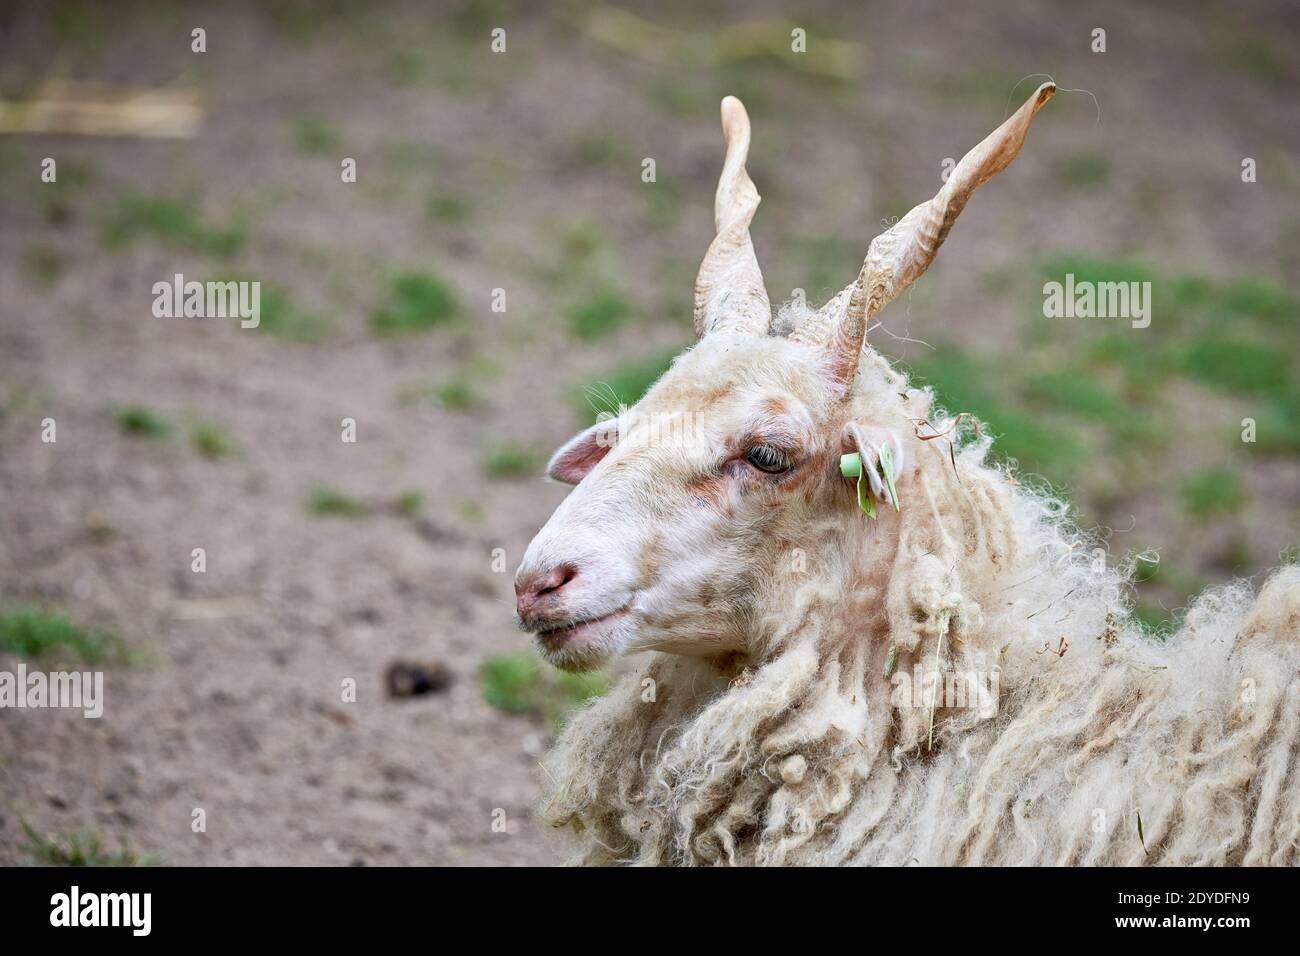 Hungarian Racka sheep,head close-up.Breed of sheep known for its unusual spiral-shaped horns Stock Photo